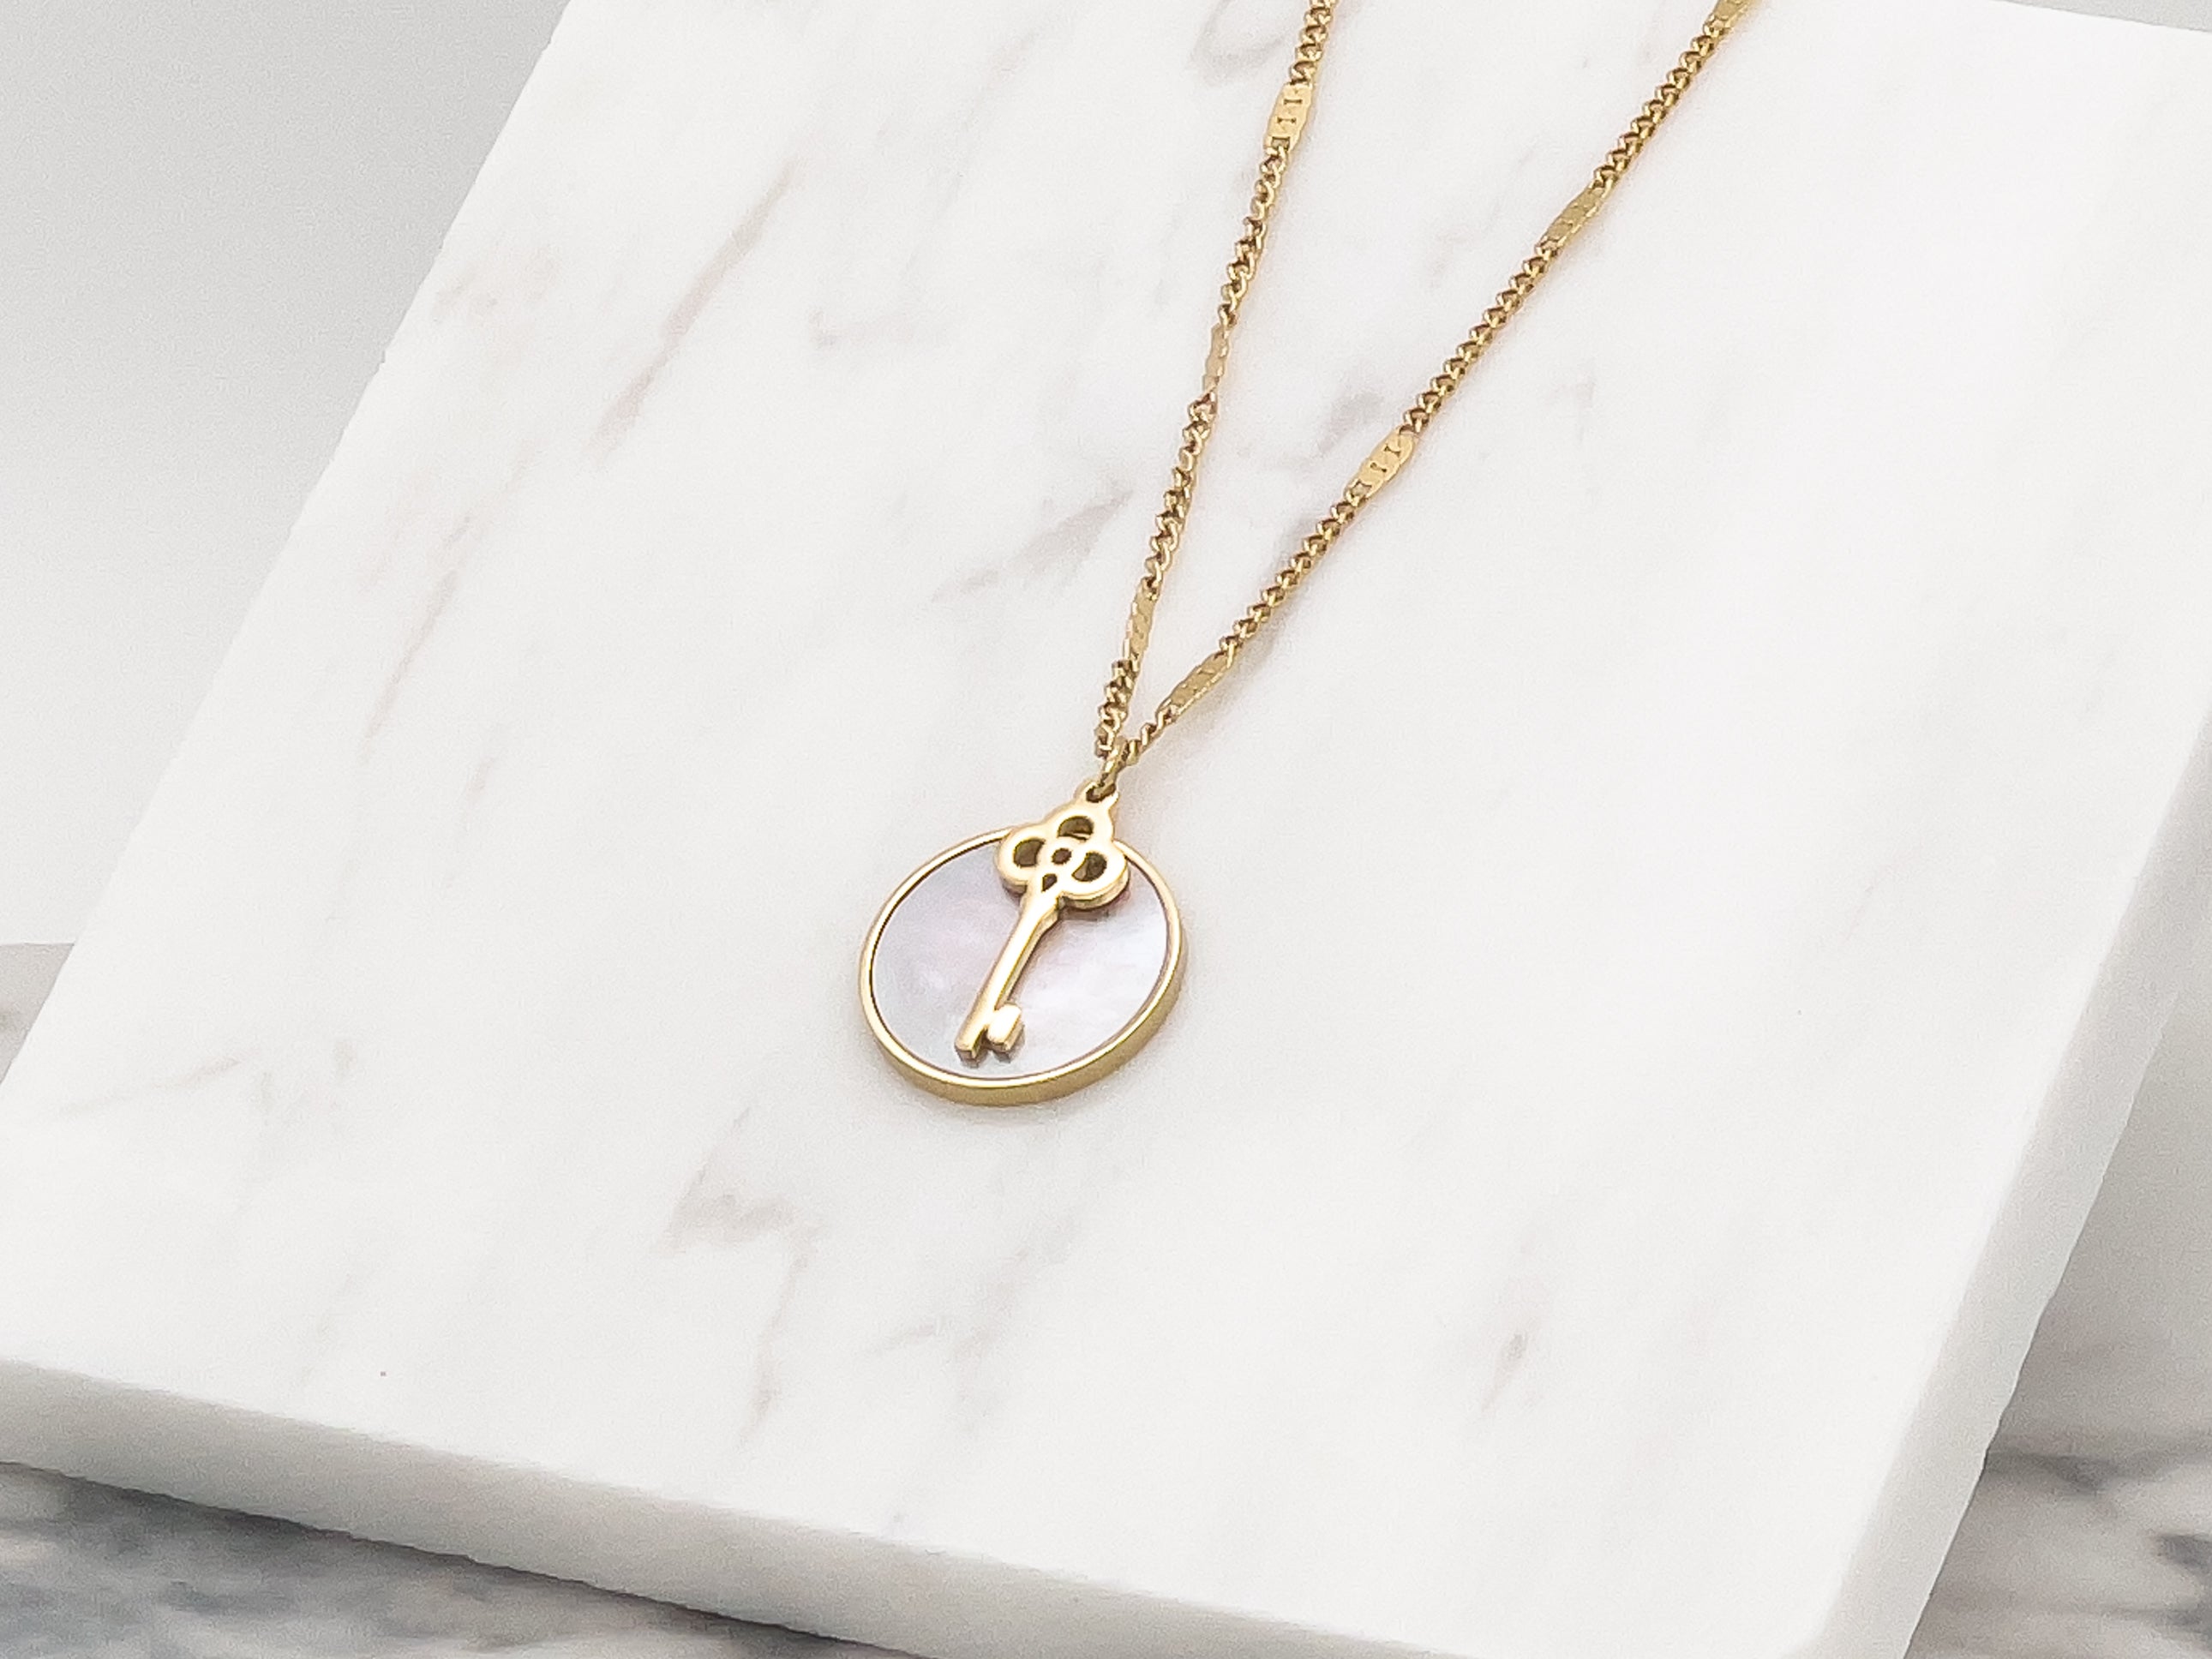 Key To My Soul Pendant Necklace For Sale - Jeweley Online | Chic Chic Bon